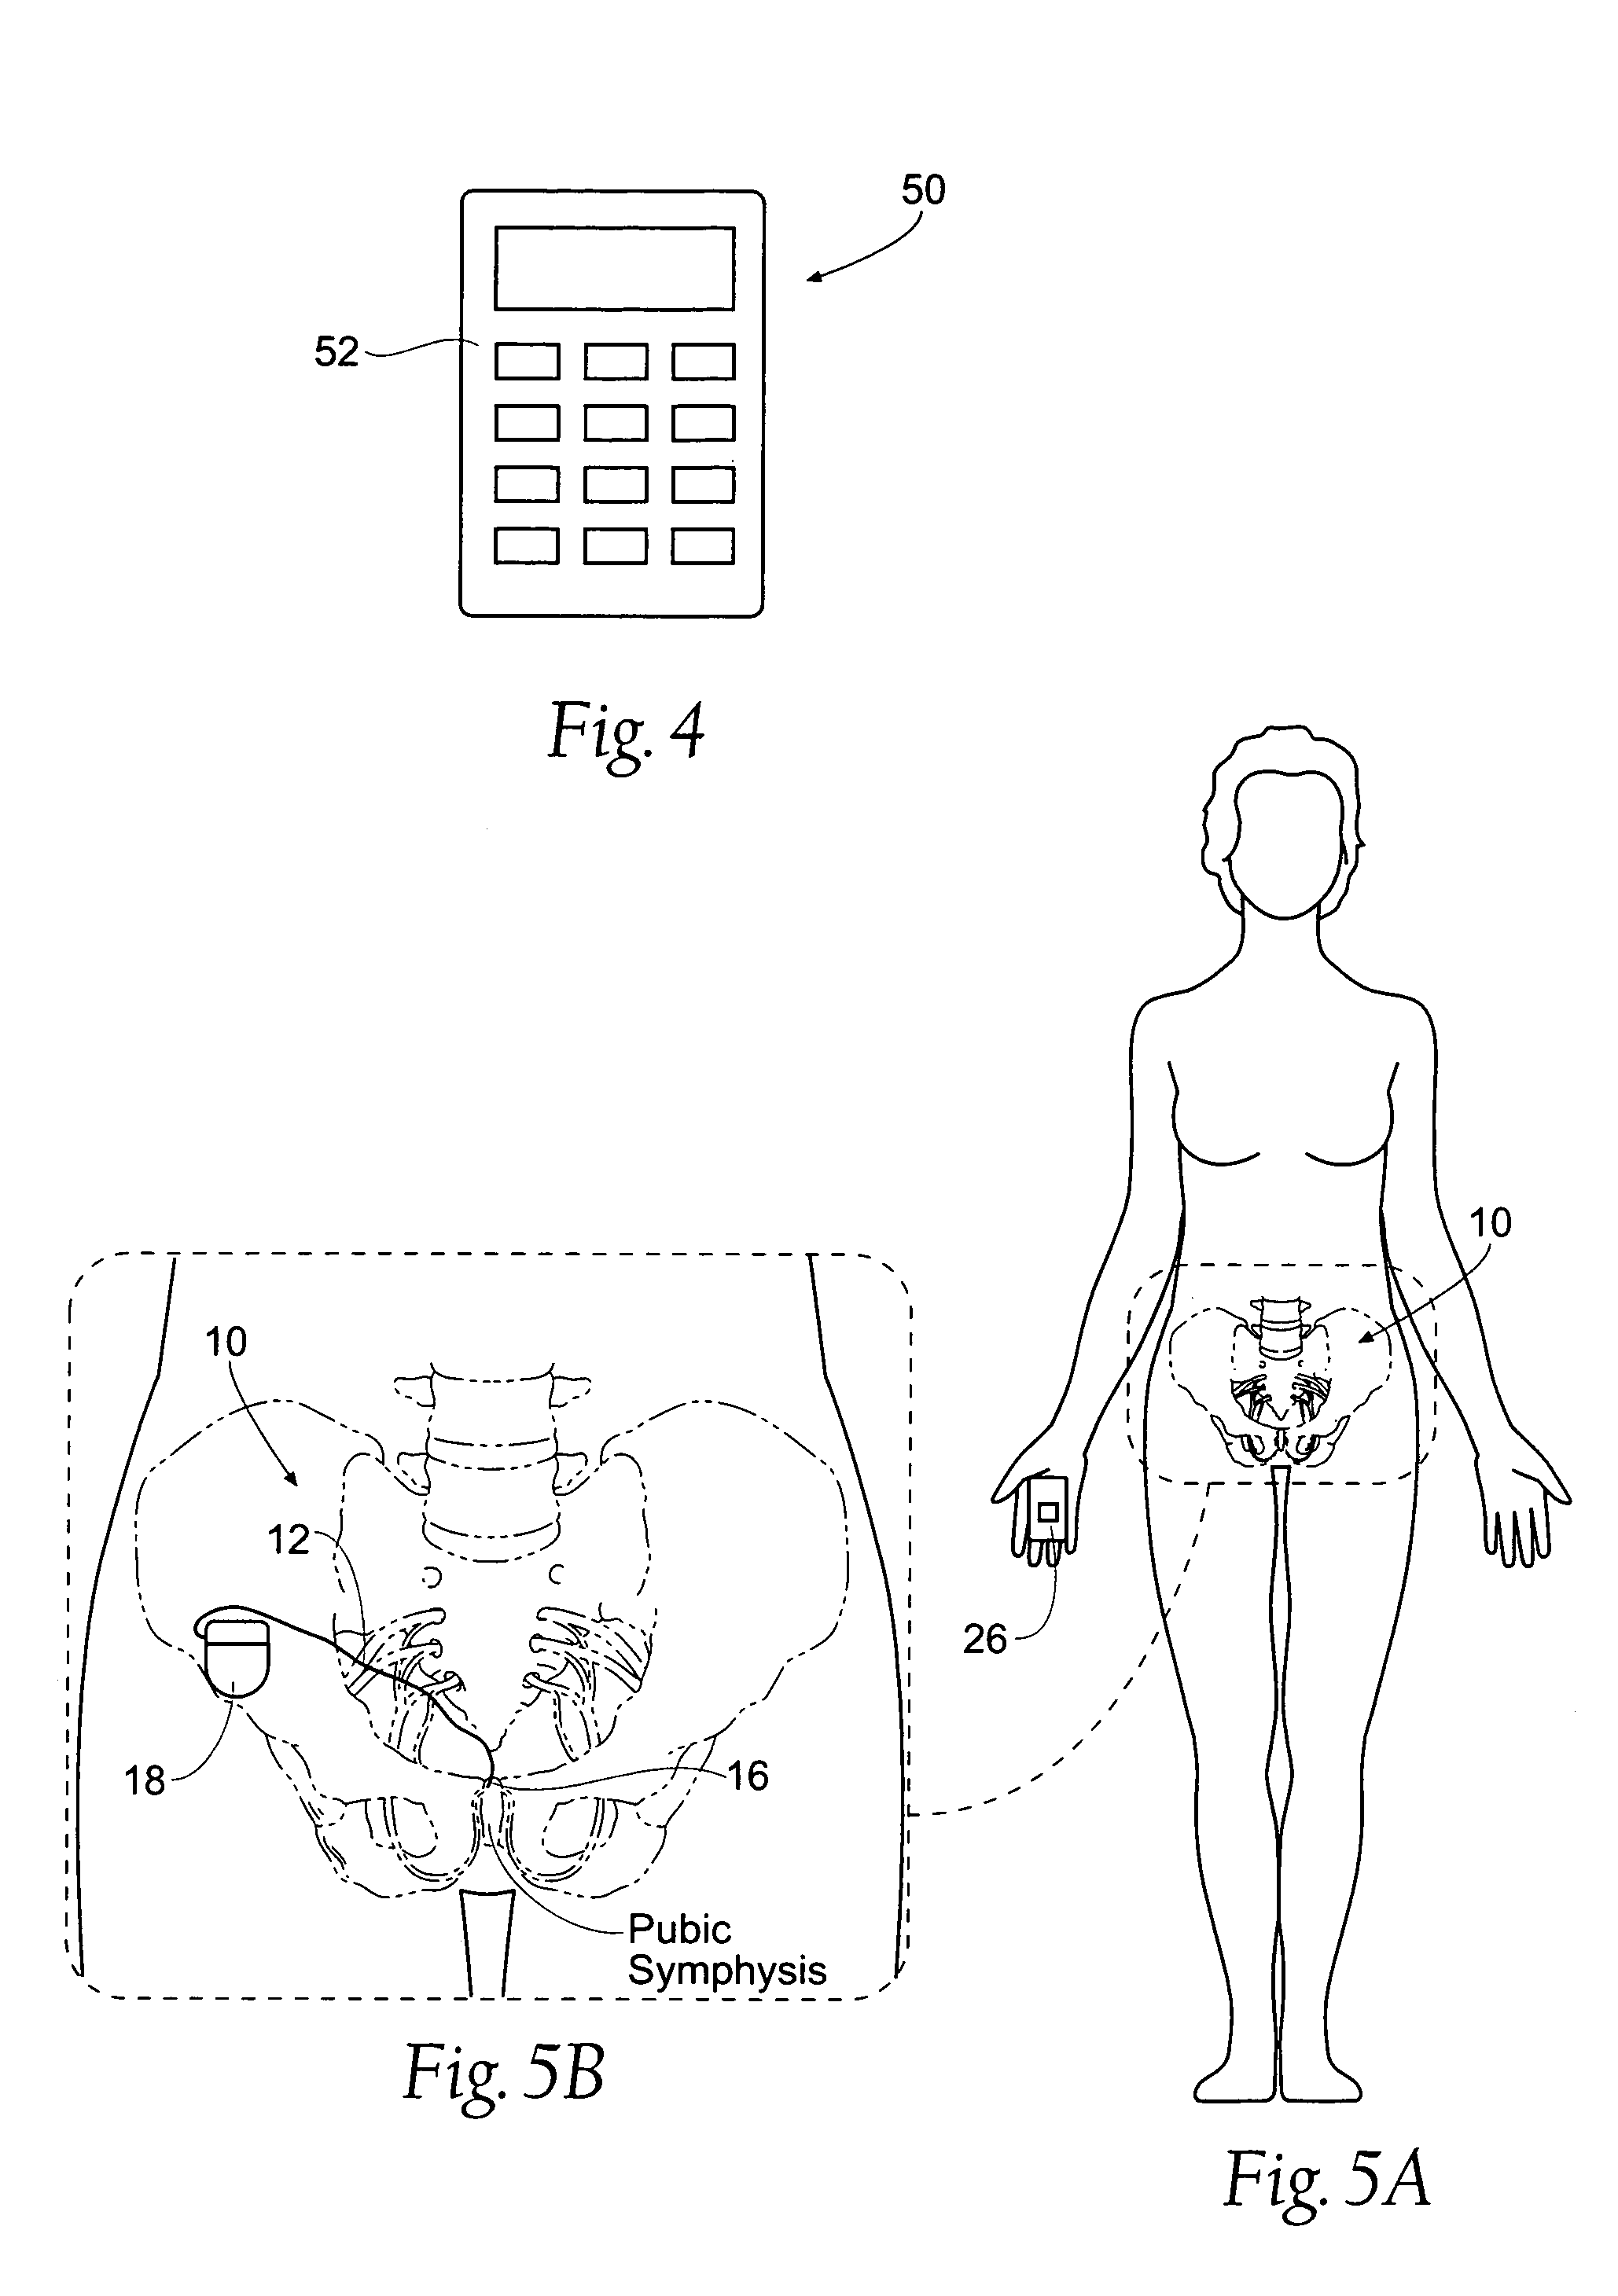 Method for affecting urinary function with electrode implantation in adipose tissue